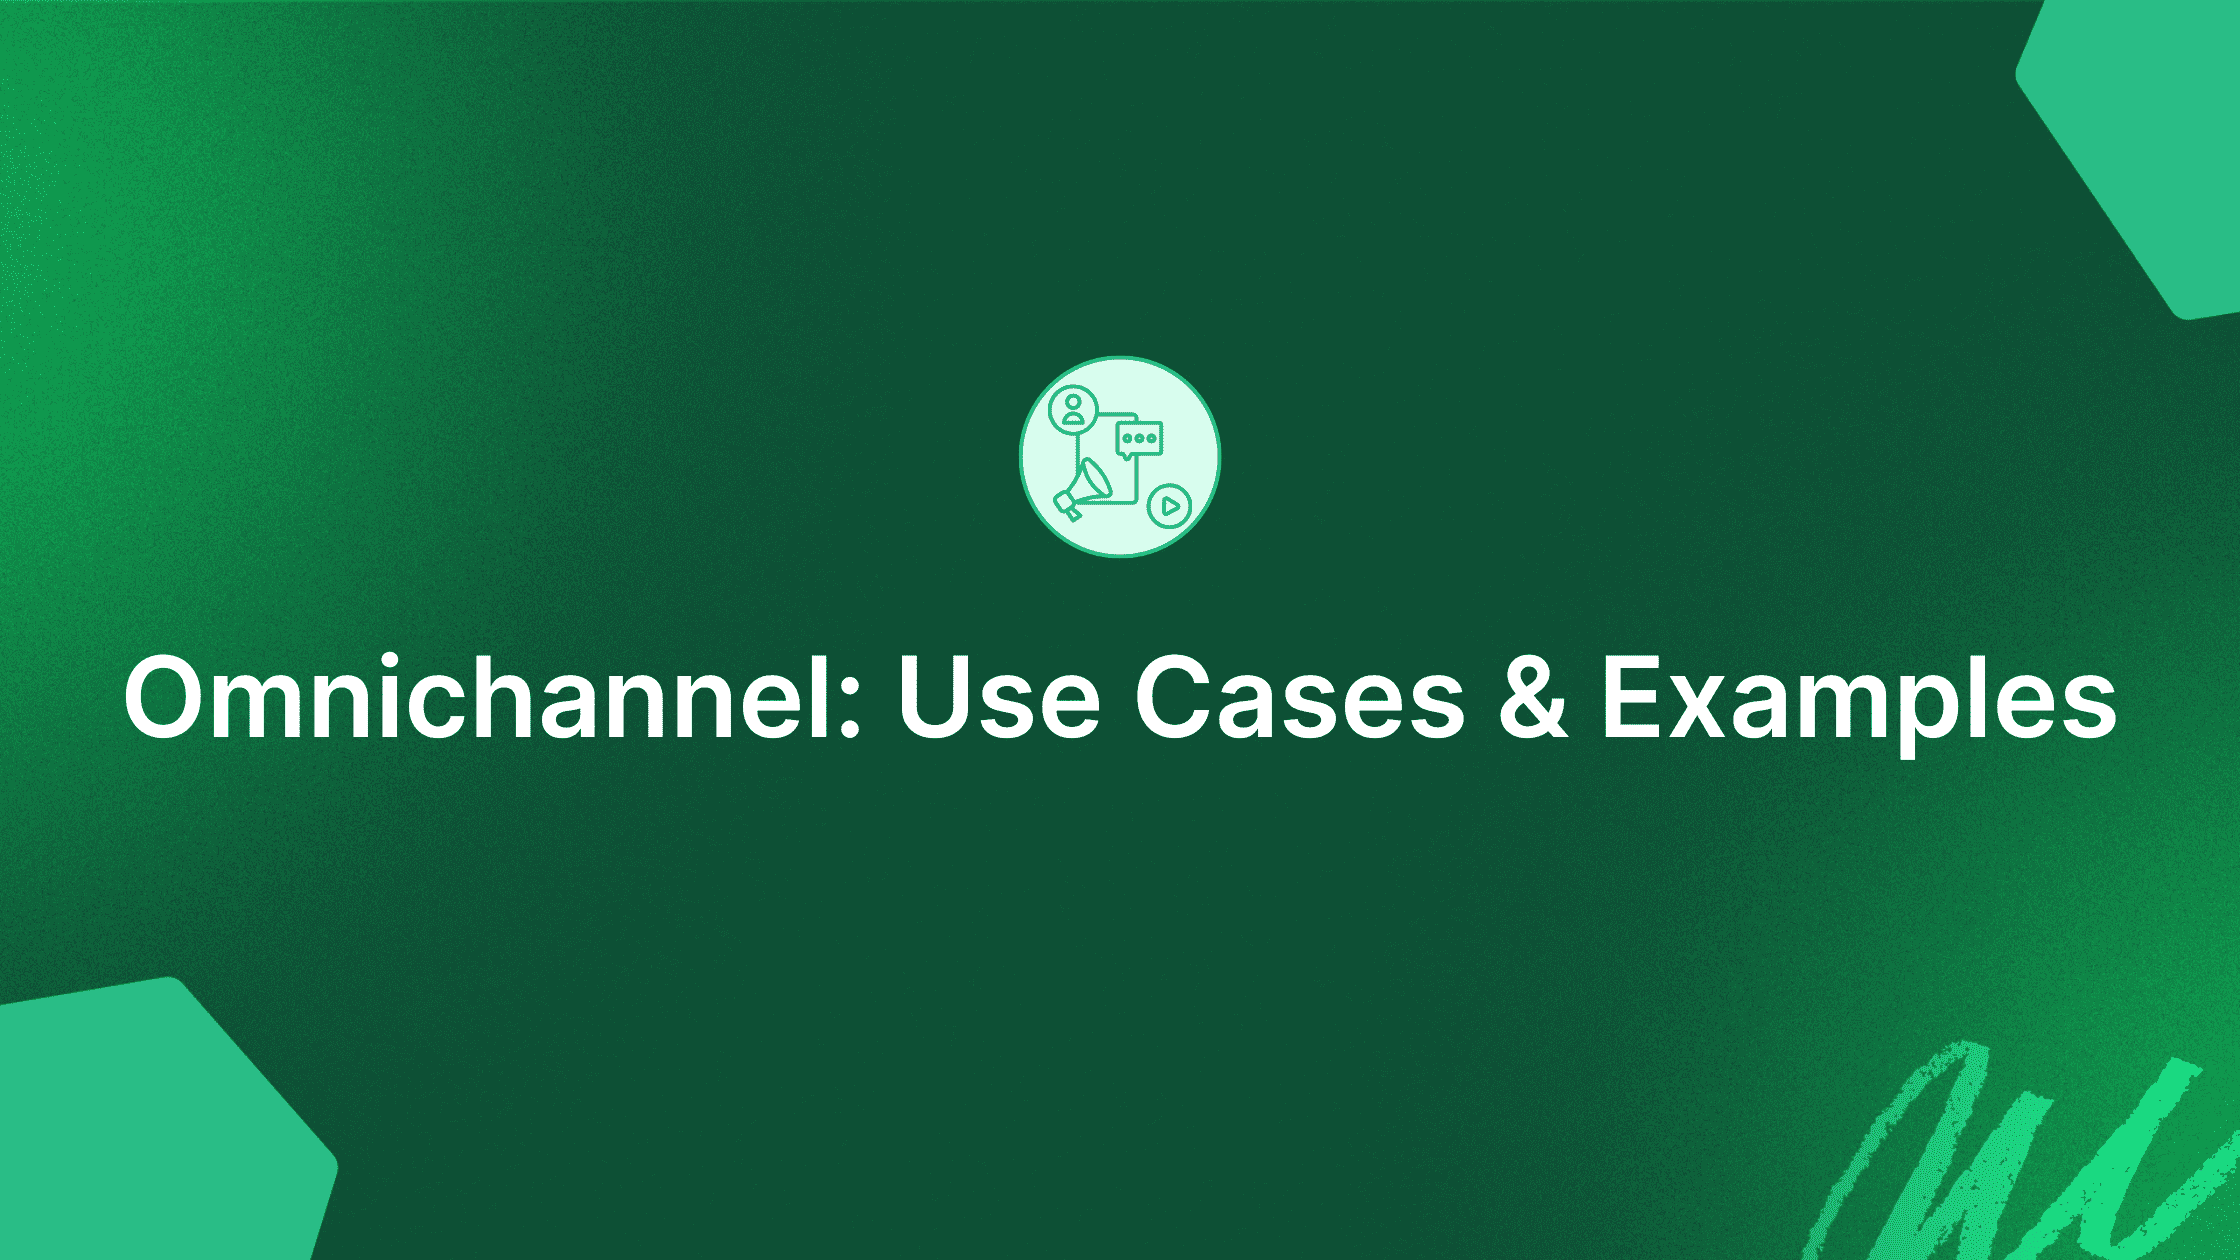 What is an Omnichannel Examples/ Usecases